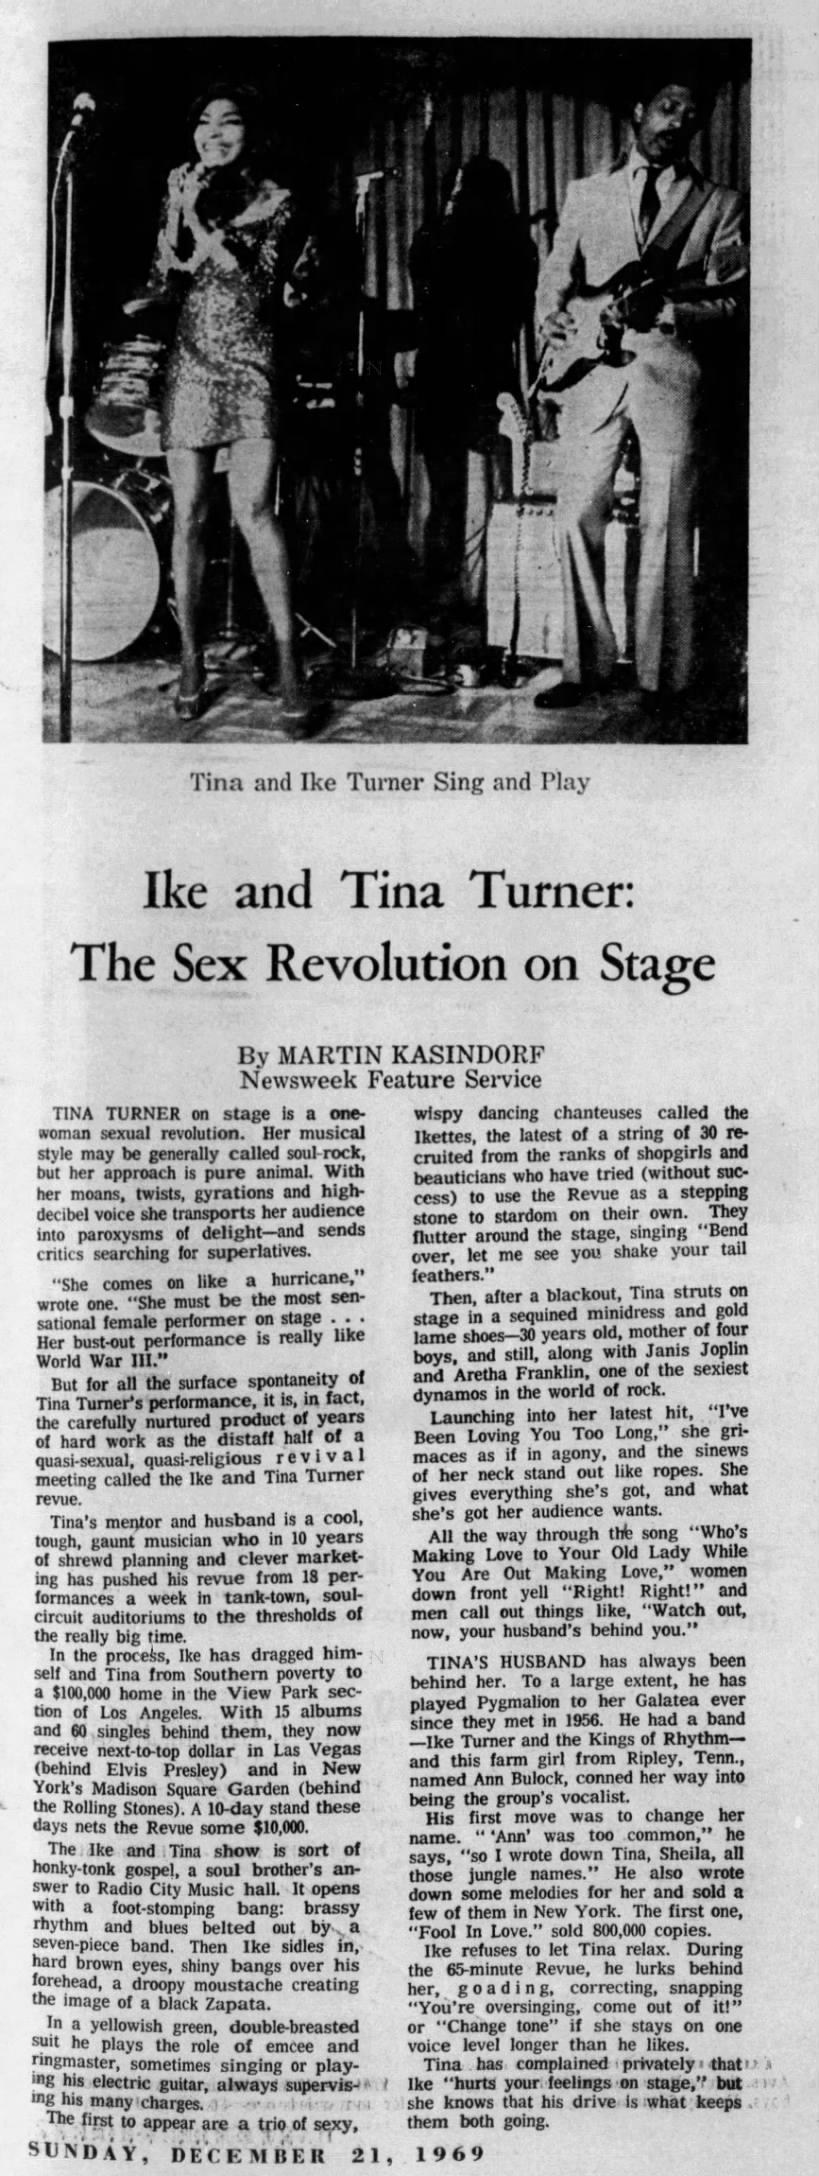 Ike and Tuna Turner: The Sex Revolution on Stage